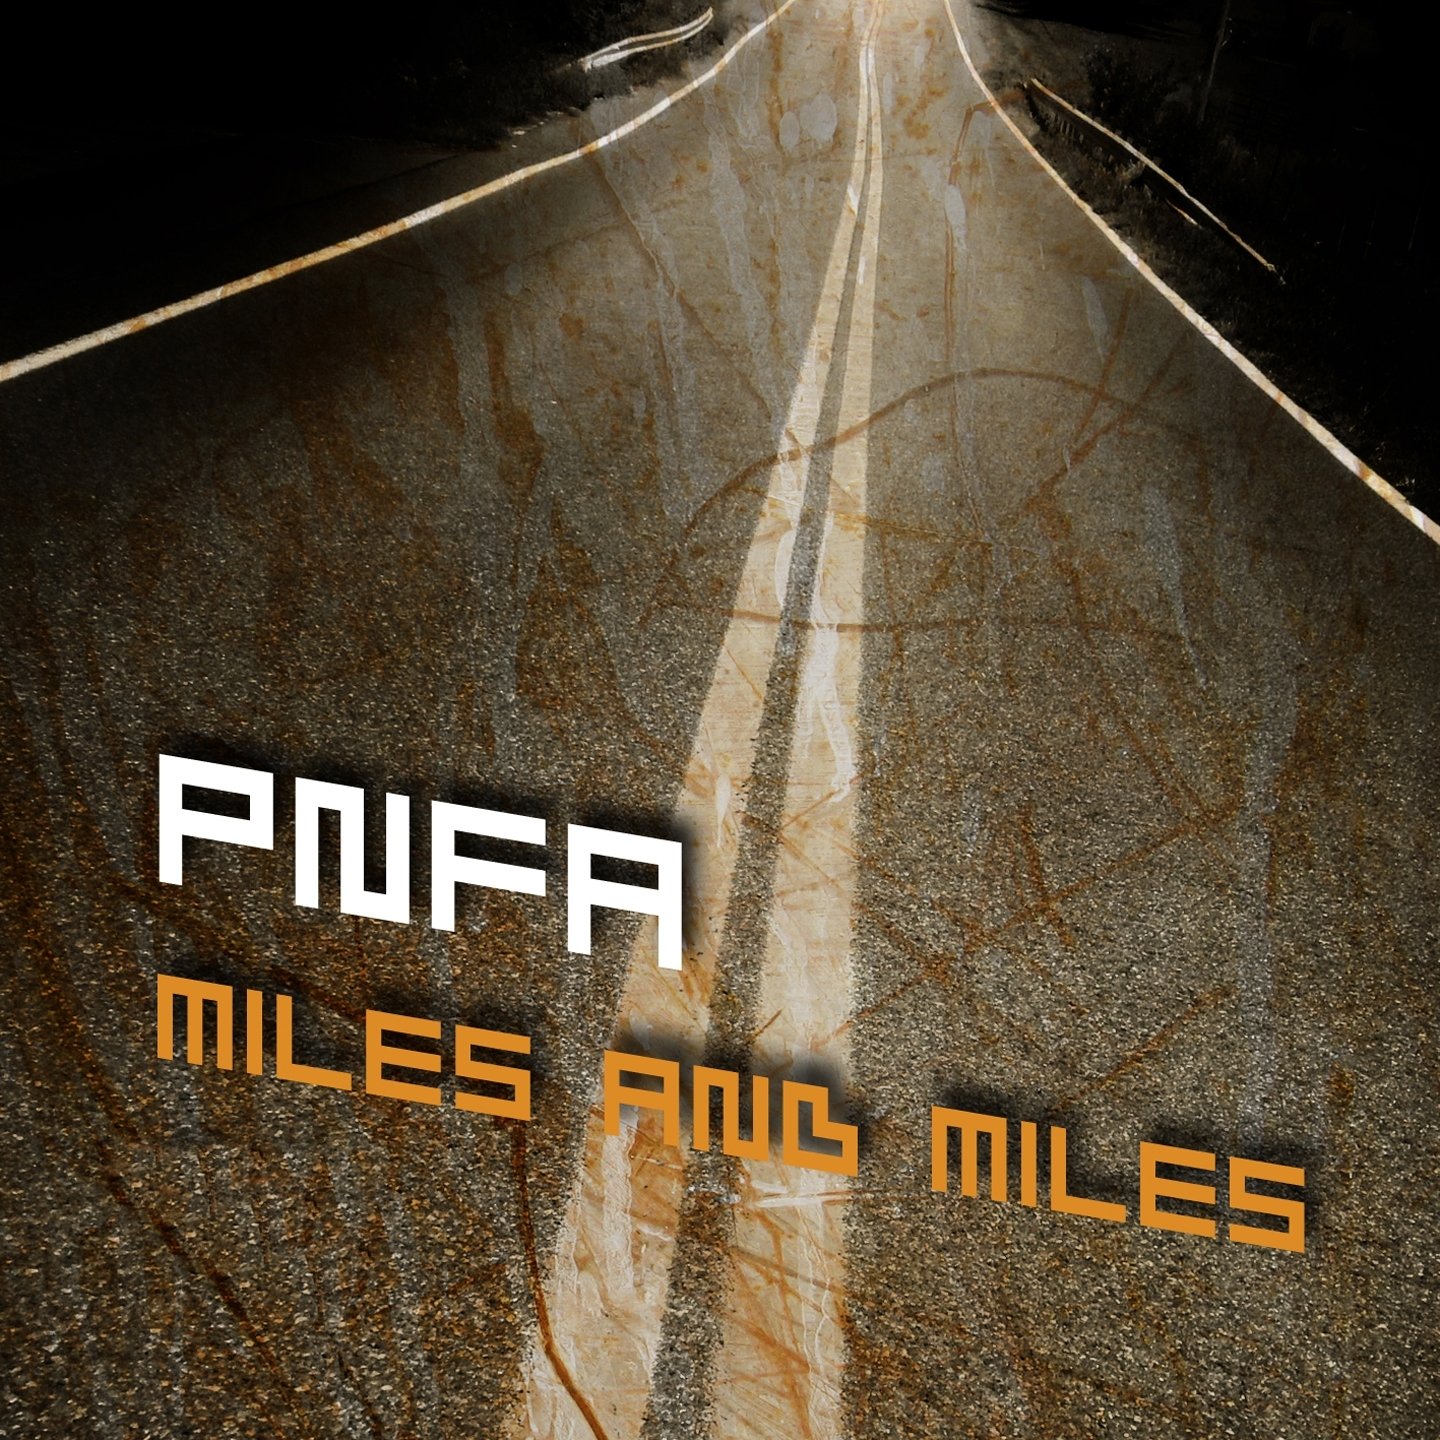 Miles and when. Miles of smiles. PNFA. See for Miles and Miles фото. Immerge.